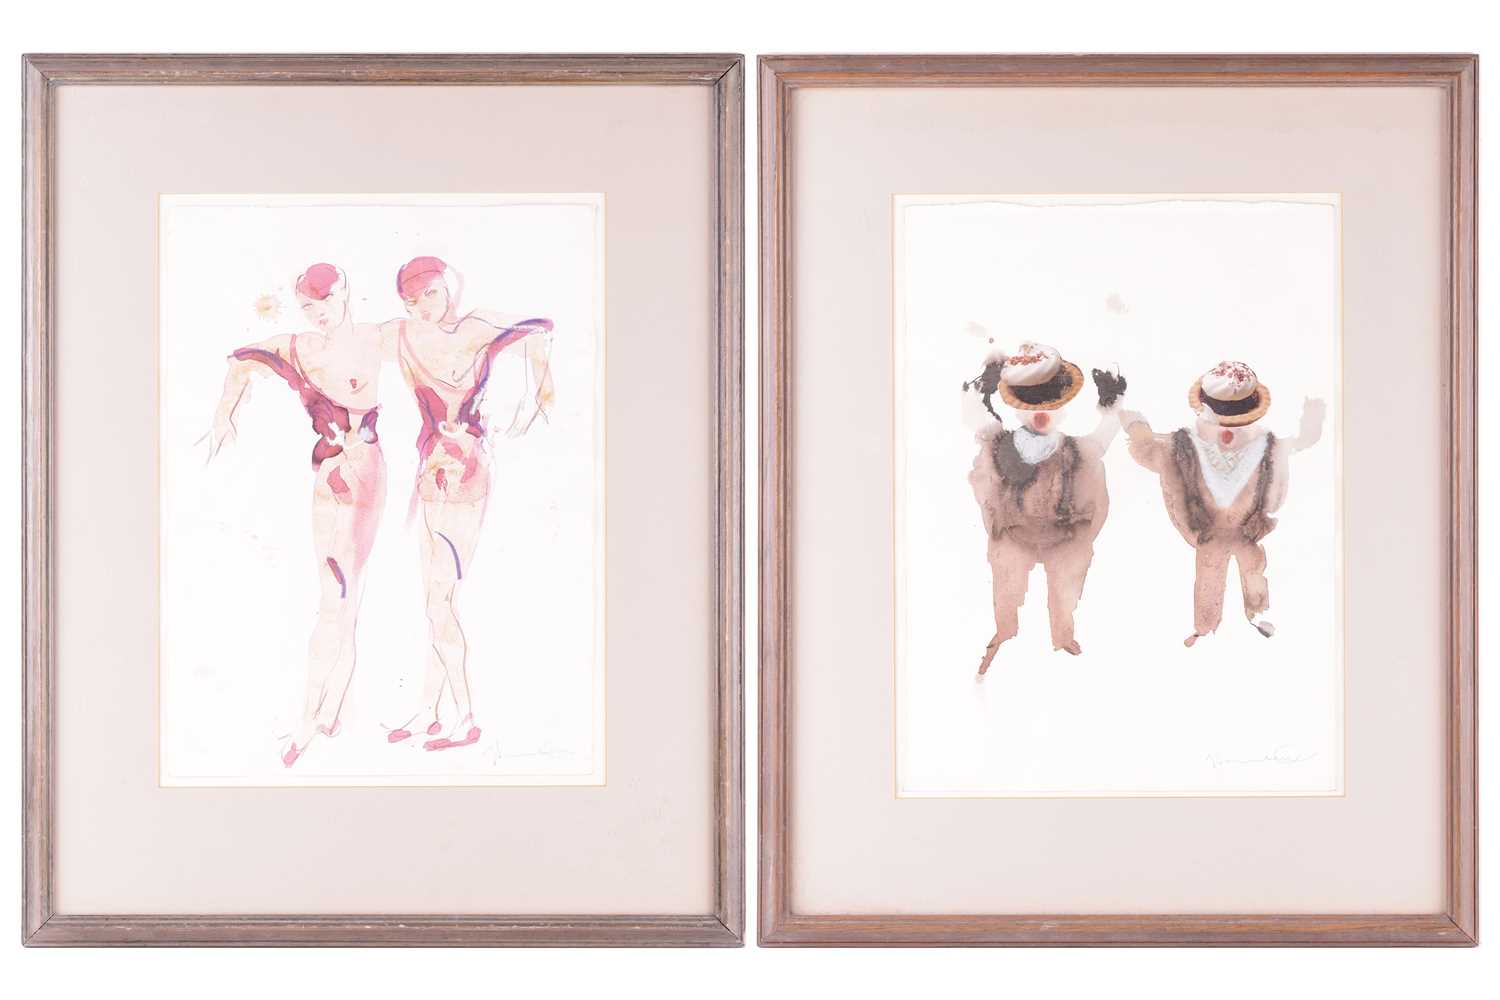 Yolanda Sonnabend (1935 - 2015), Theatrical costume designs for two dancers, signed in pencil (lower